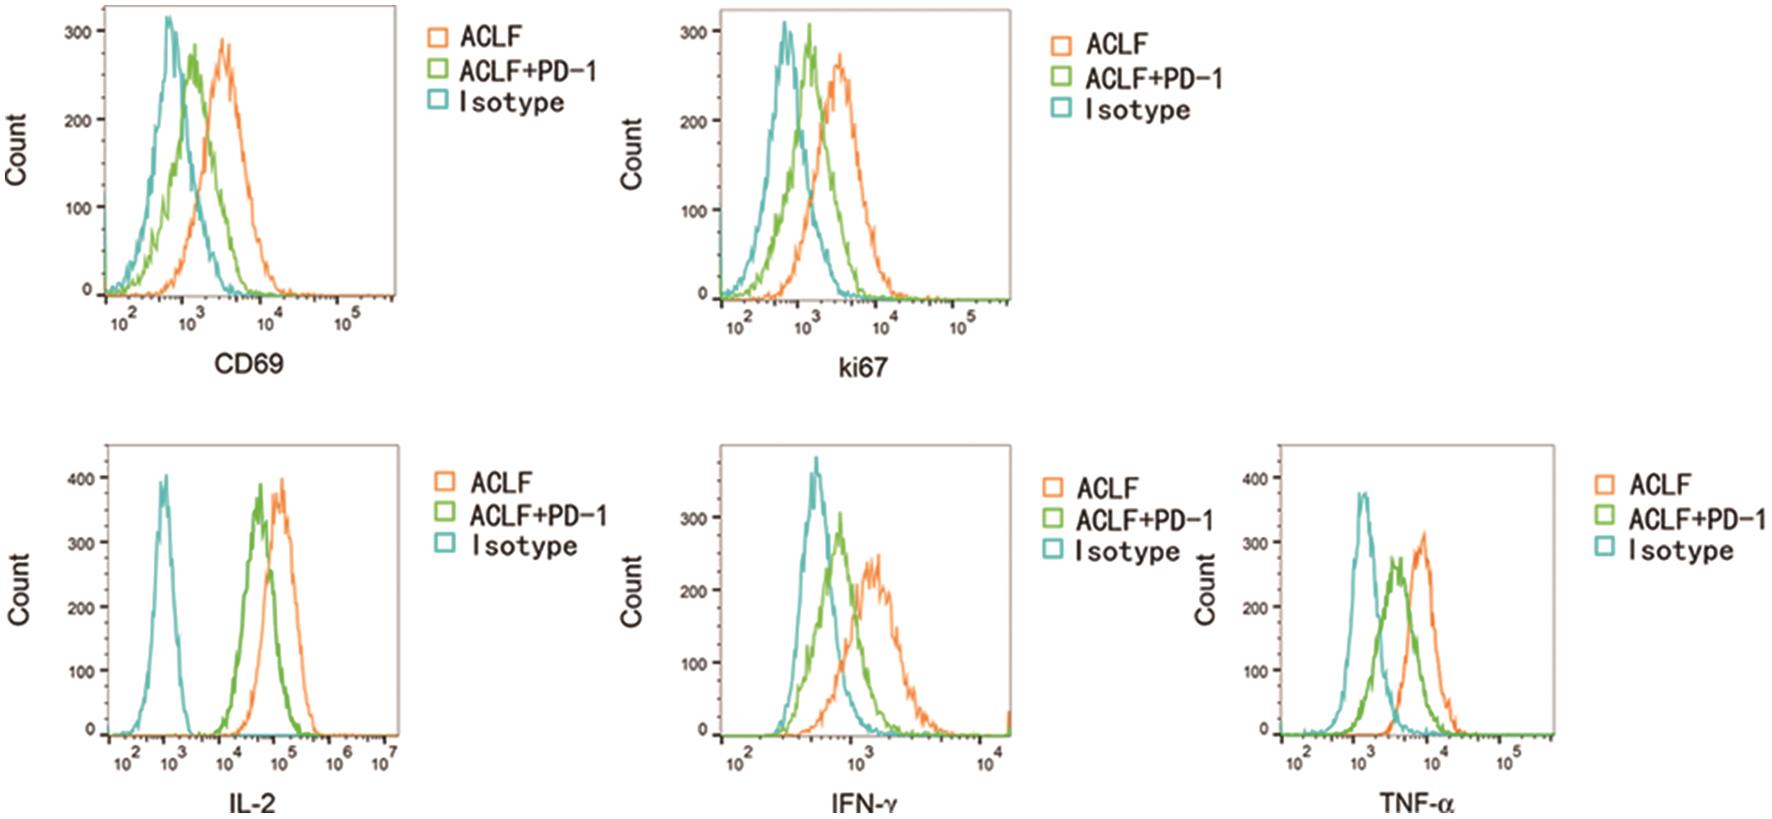 When PD-1/PD-L1 was activated, the cell viability (CD69) (MFI: 917±43 vs. 1,723±143, <italic>p</italic><0.001] and proliferative ability (Ki67) (MFI: 940±71 vs. 1,737±139, <italic>p</italic><0.001) of CD8+ T lymphocytes in patients in the ACLF+PD-1 group were lower than those in the ACLF group.